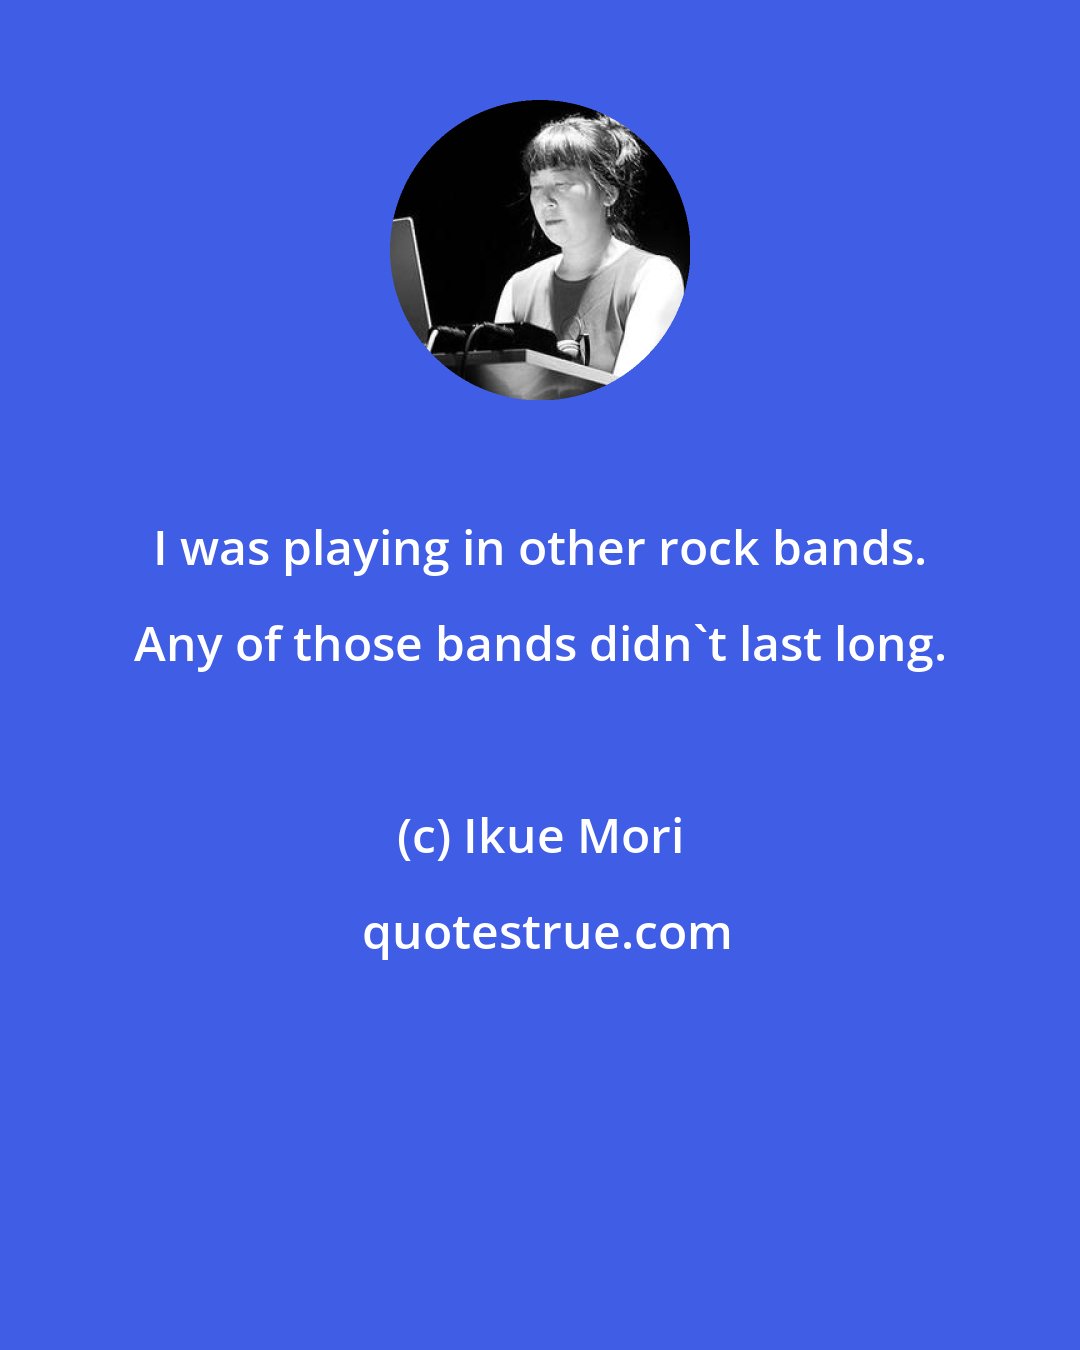 Ikue Mori: I was playing in other rock bands. Any of those bands didn't last long.